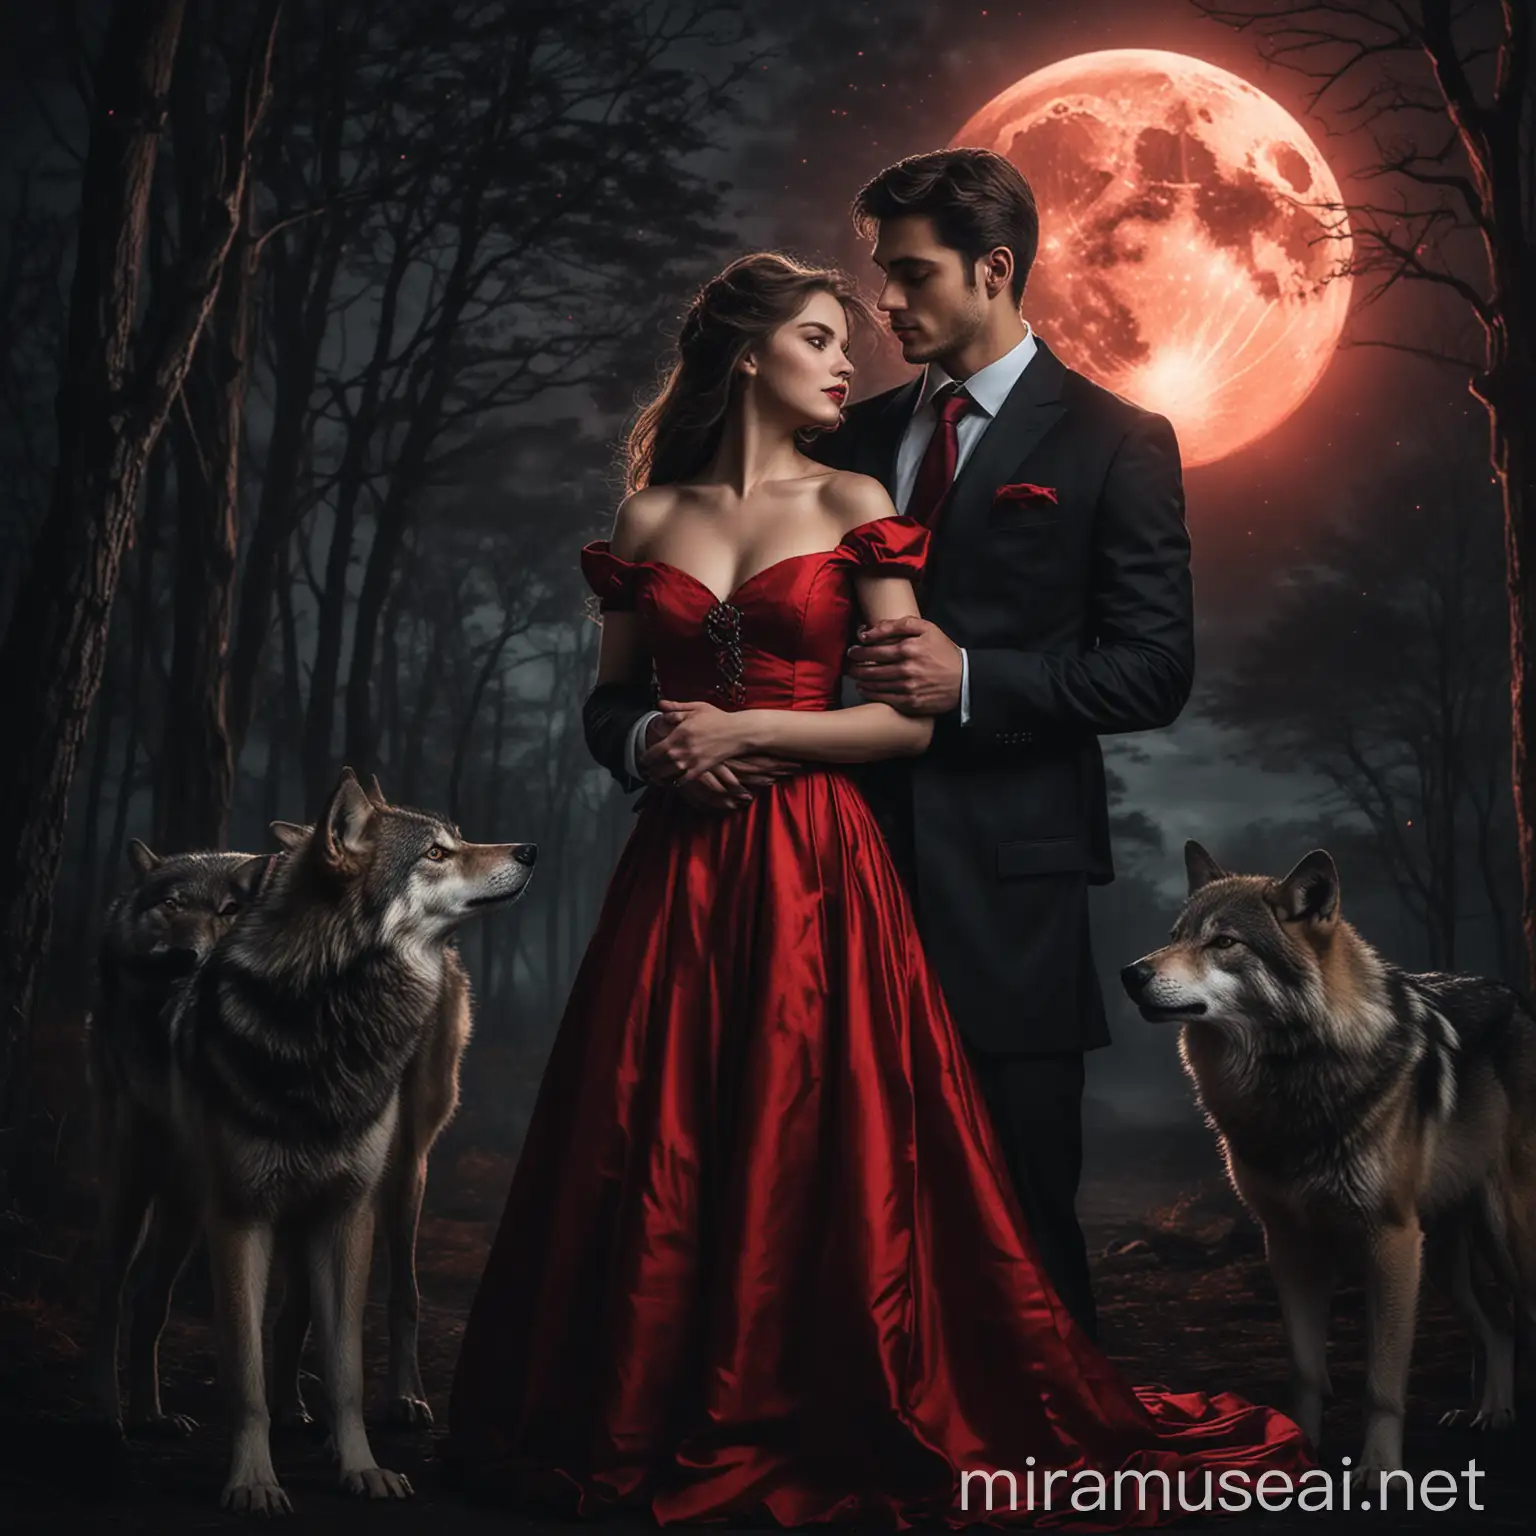 A beautiful lady in a red and black dress, held romantically by a handsome young man in suit, with wolves beside them, and a glowing moon in the dark night.